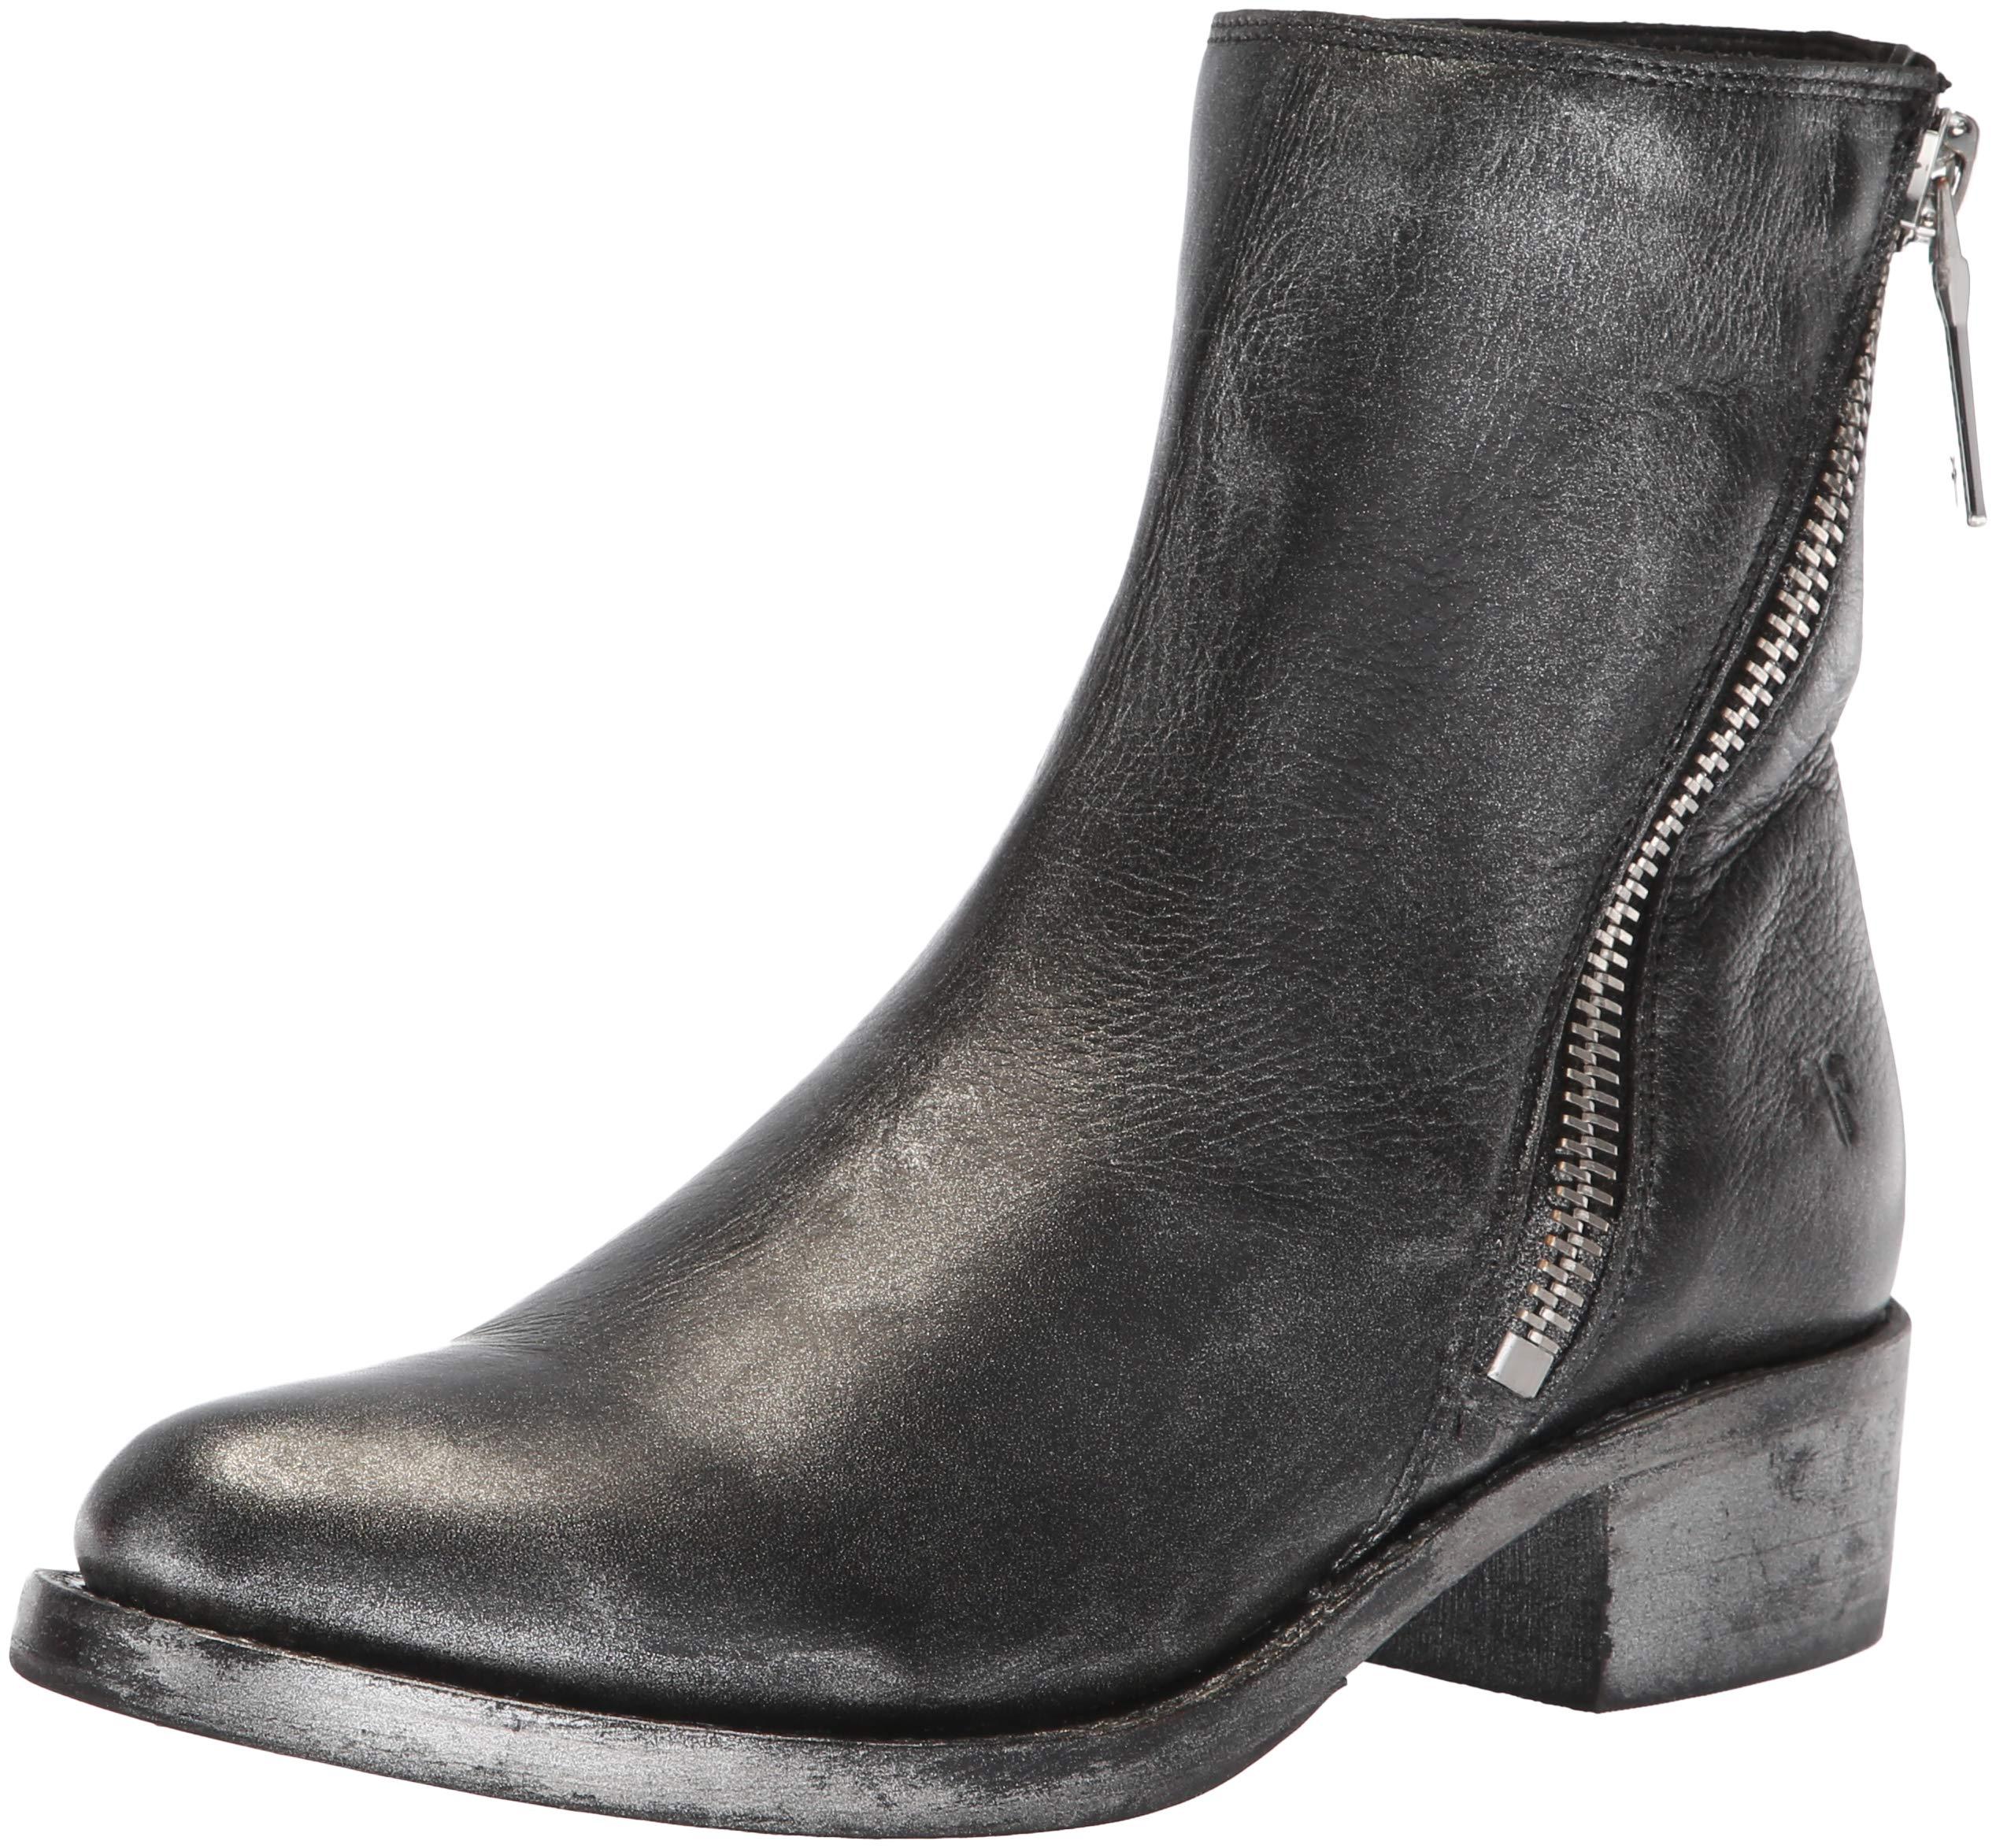 Frye Leather Demi Zip Bootie Ankle Boot in Black Metallic Leather ...